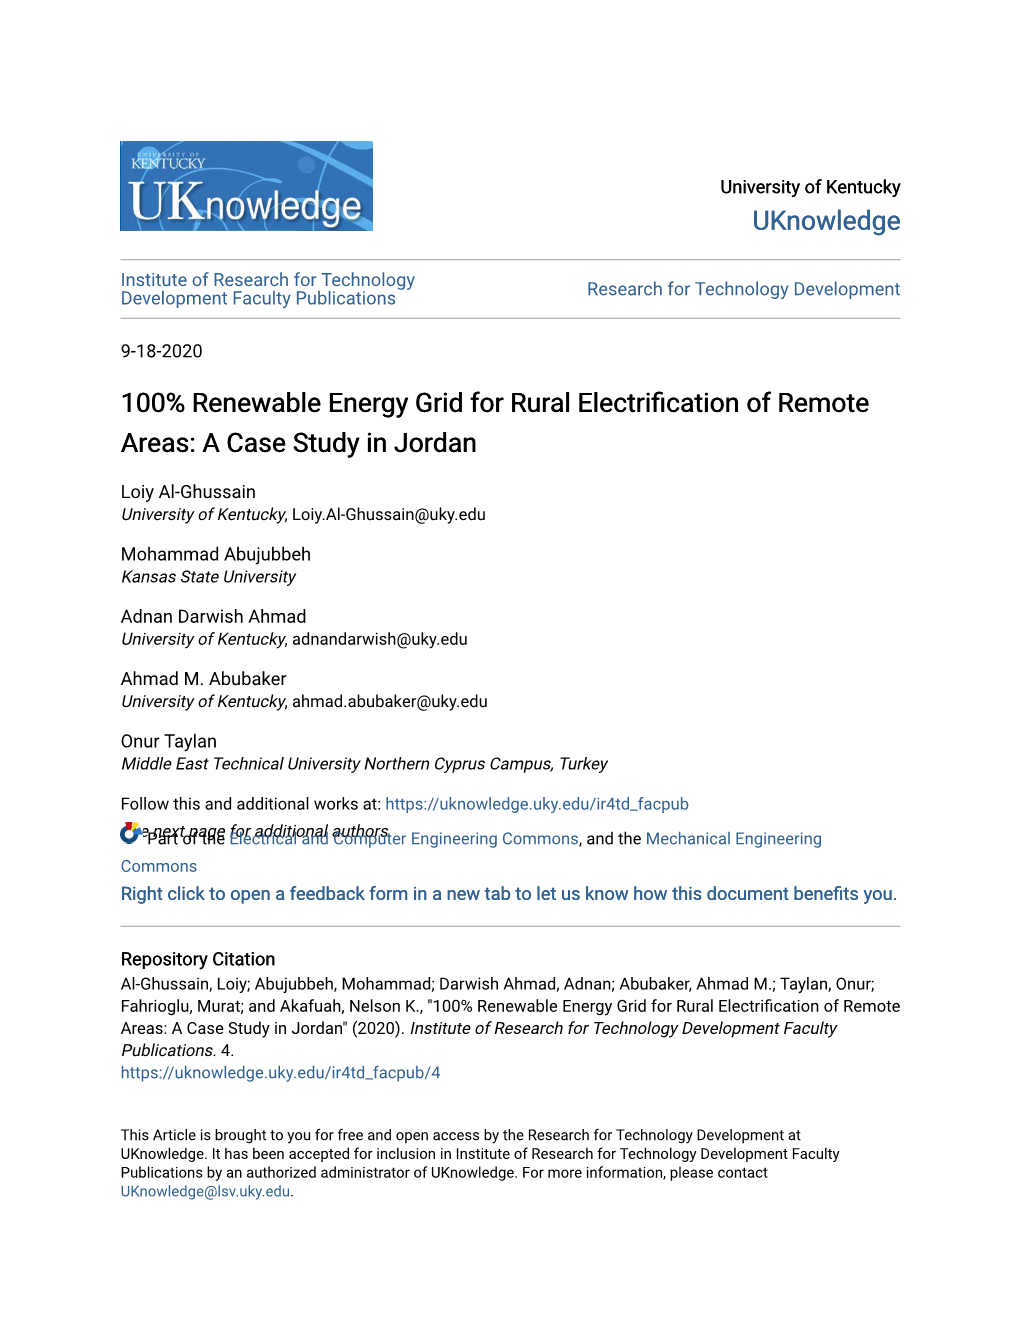 100% Renewable Energy Grid for Rural Electrification of Remote Areas: a Case Study in Jordan